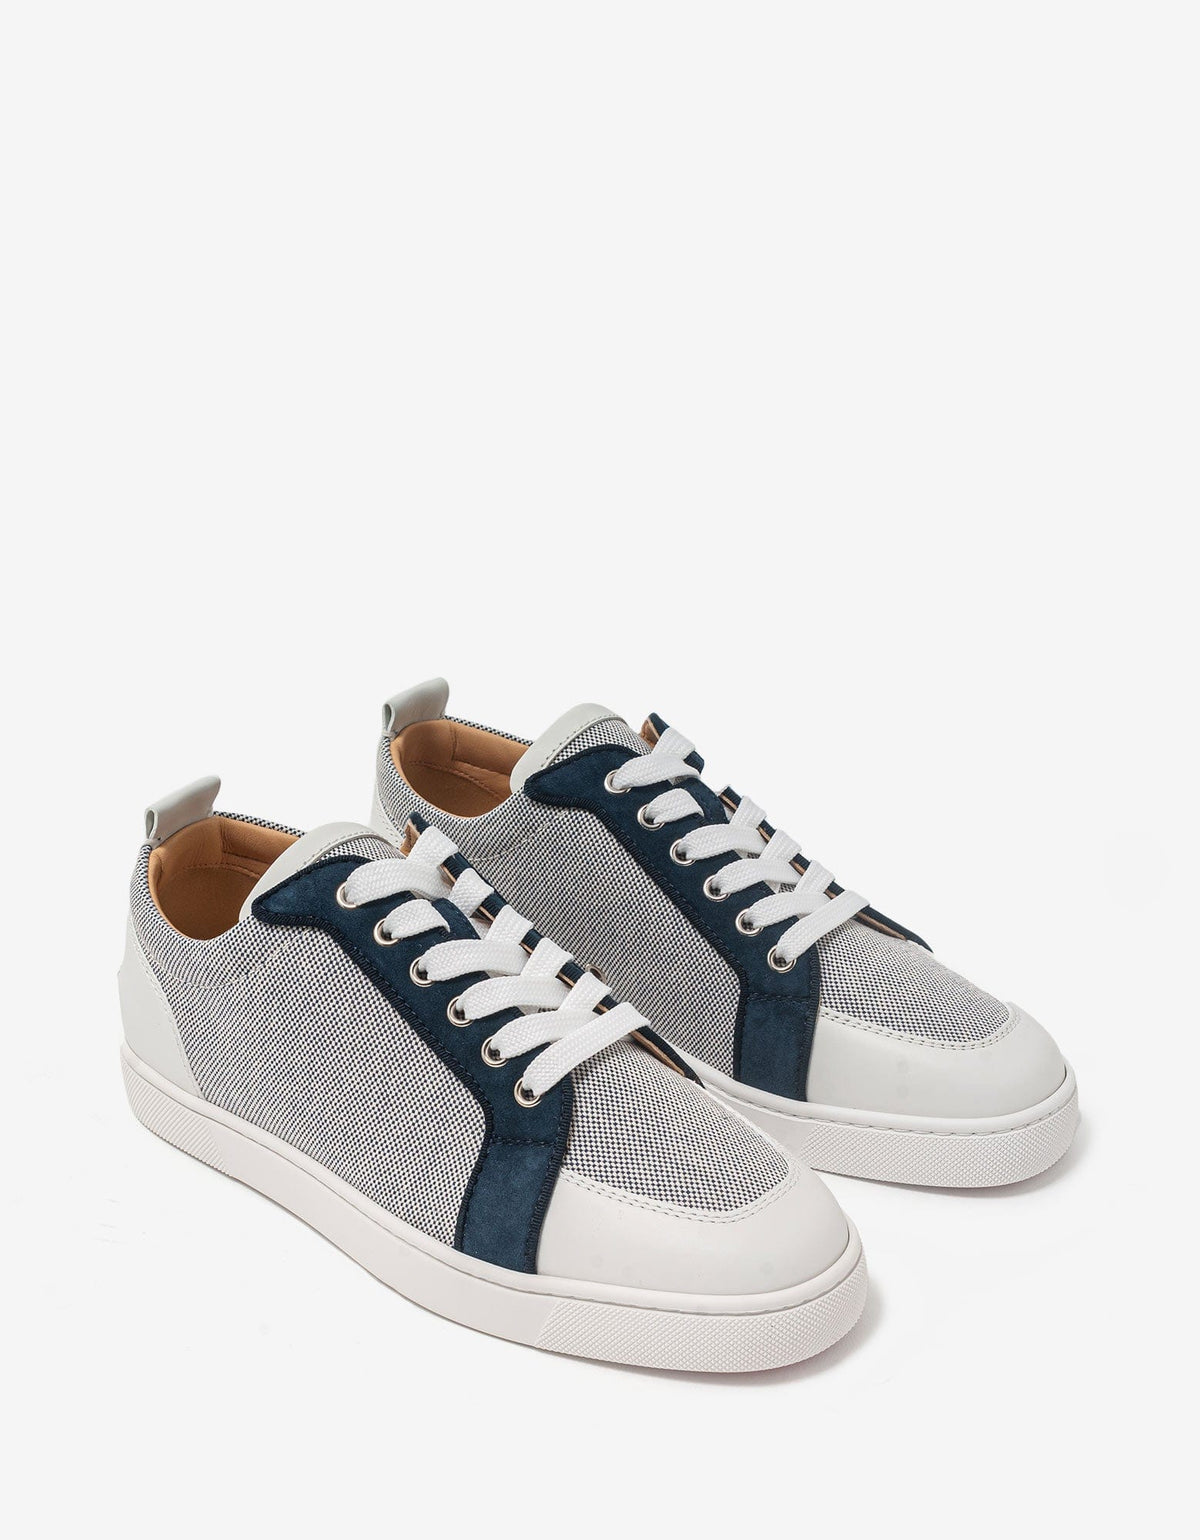 Christian Louboutin Rantulow Flat Navy Blue and & White Trainers